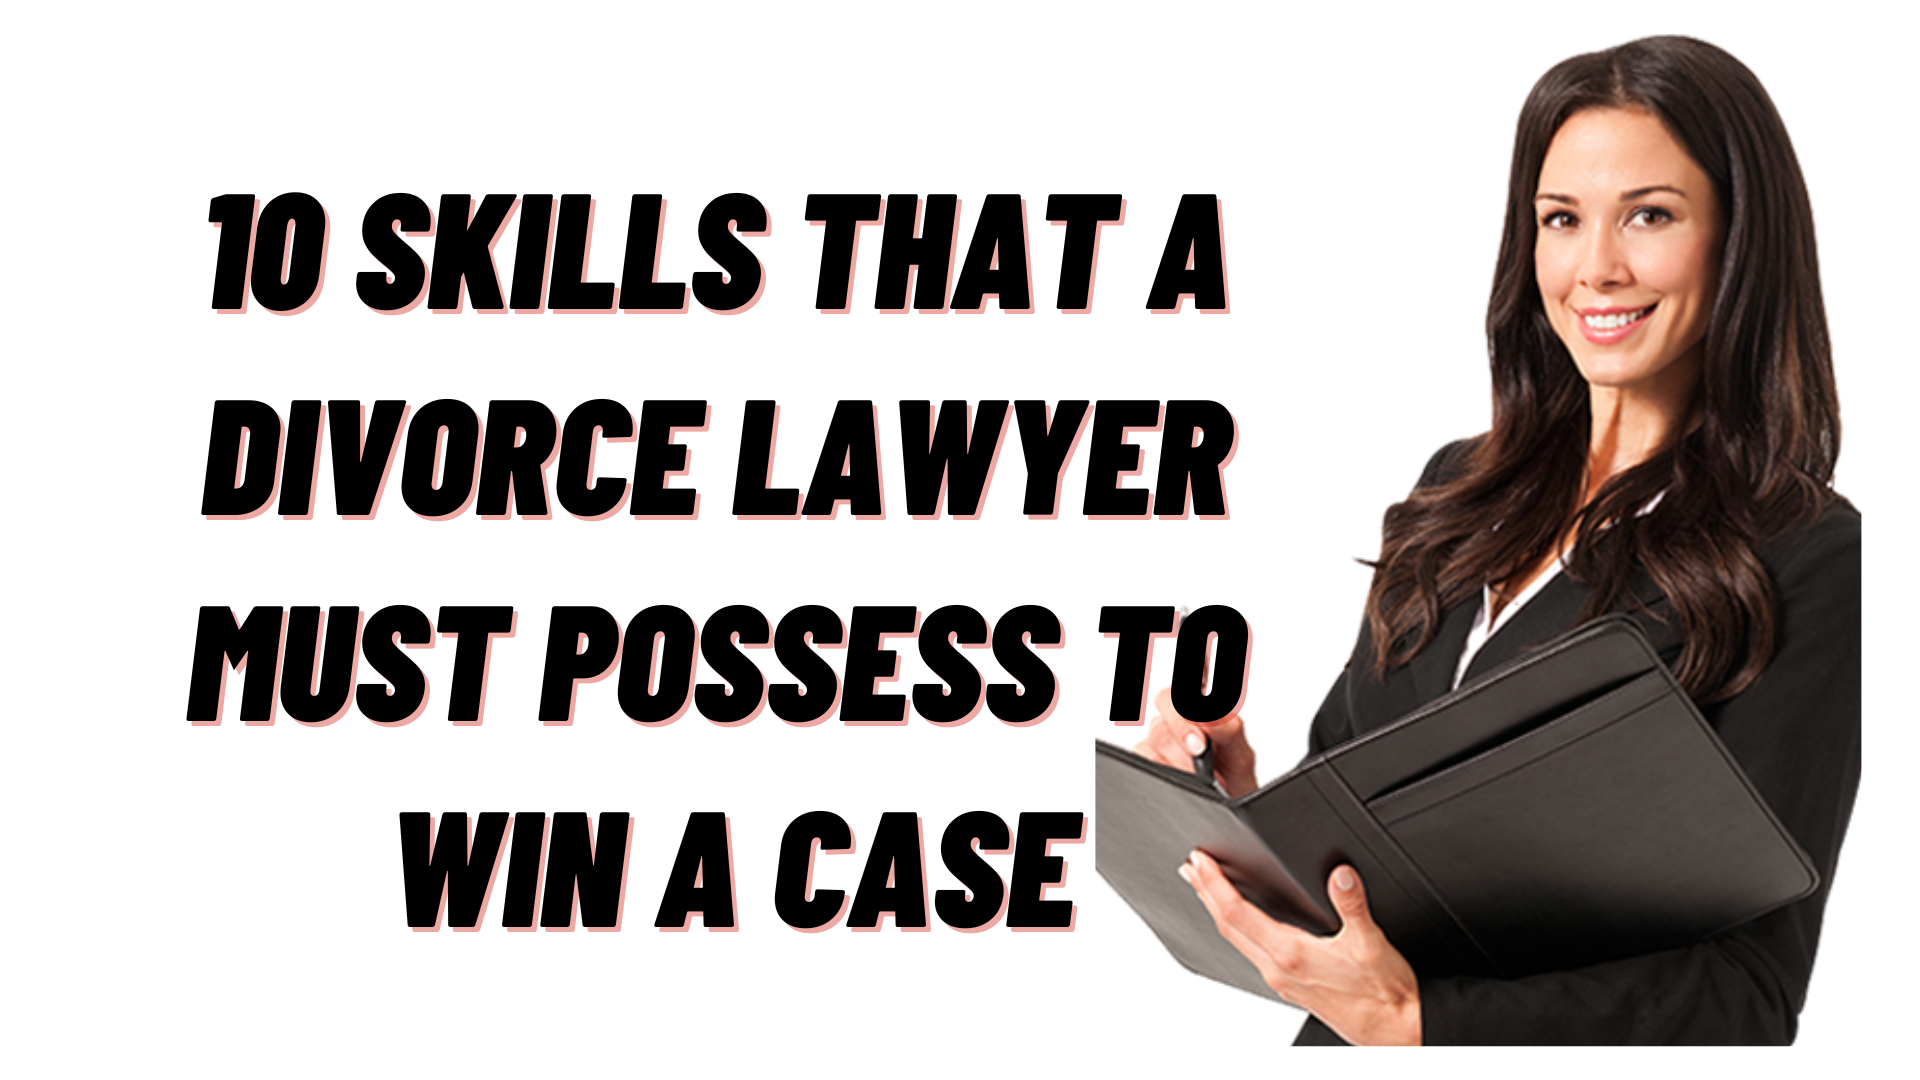 10-skills-that-a-divorce-lawyer-must-possess-to-win-a-case